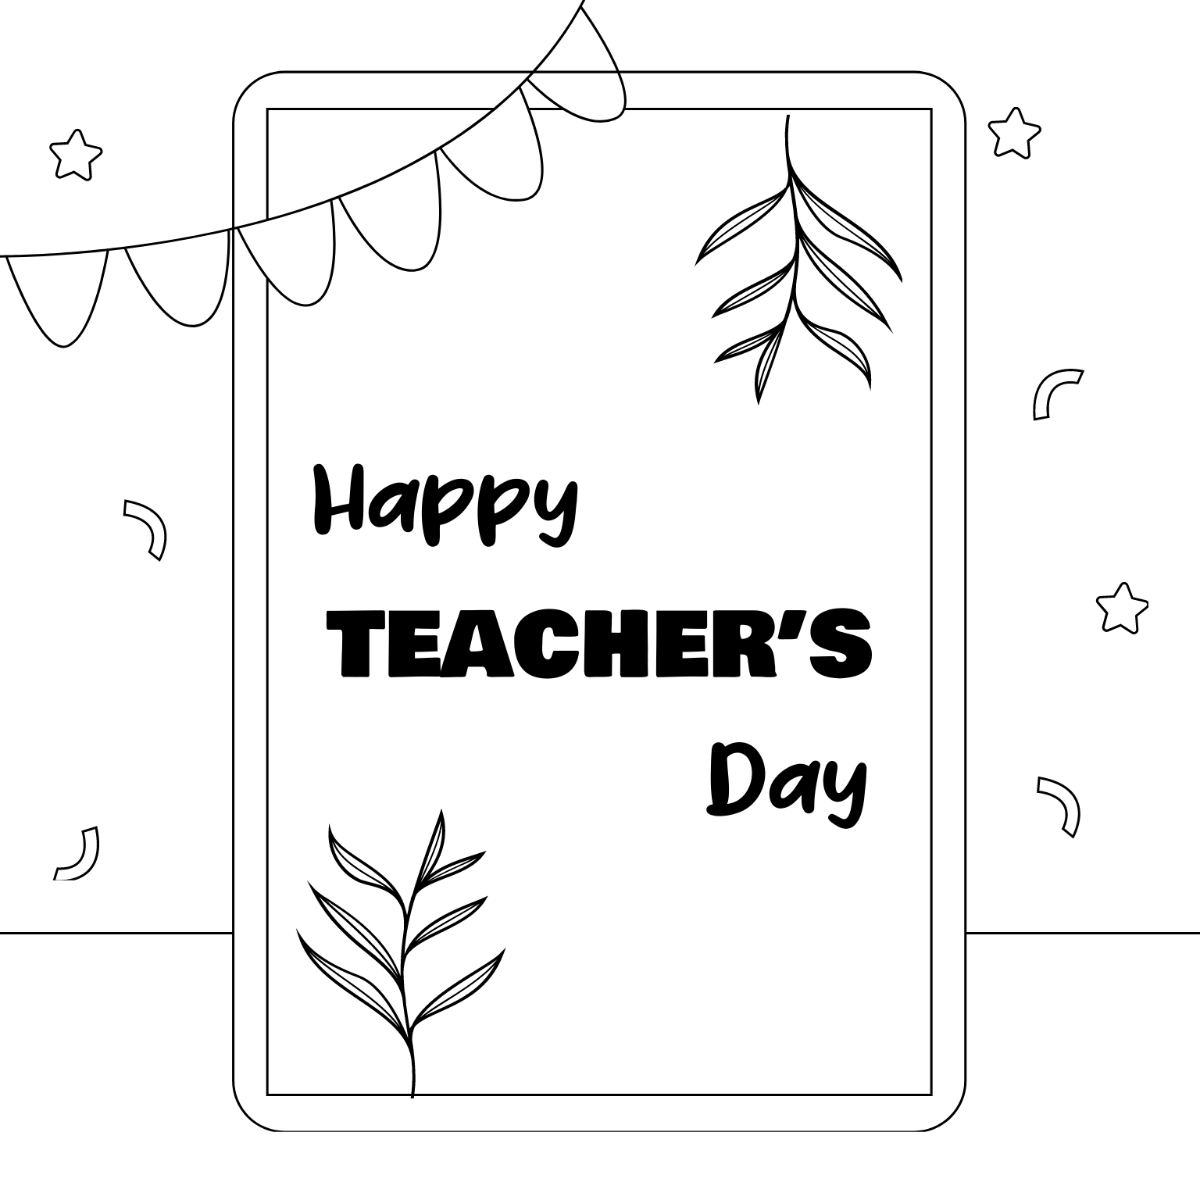 Teachers Day Greeting Card Drawing Template